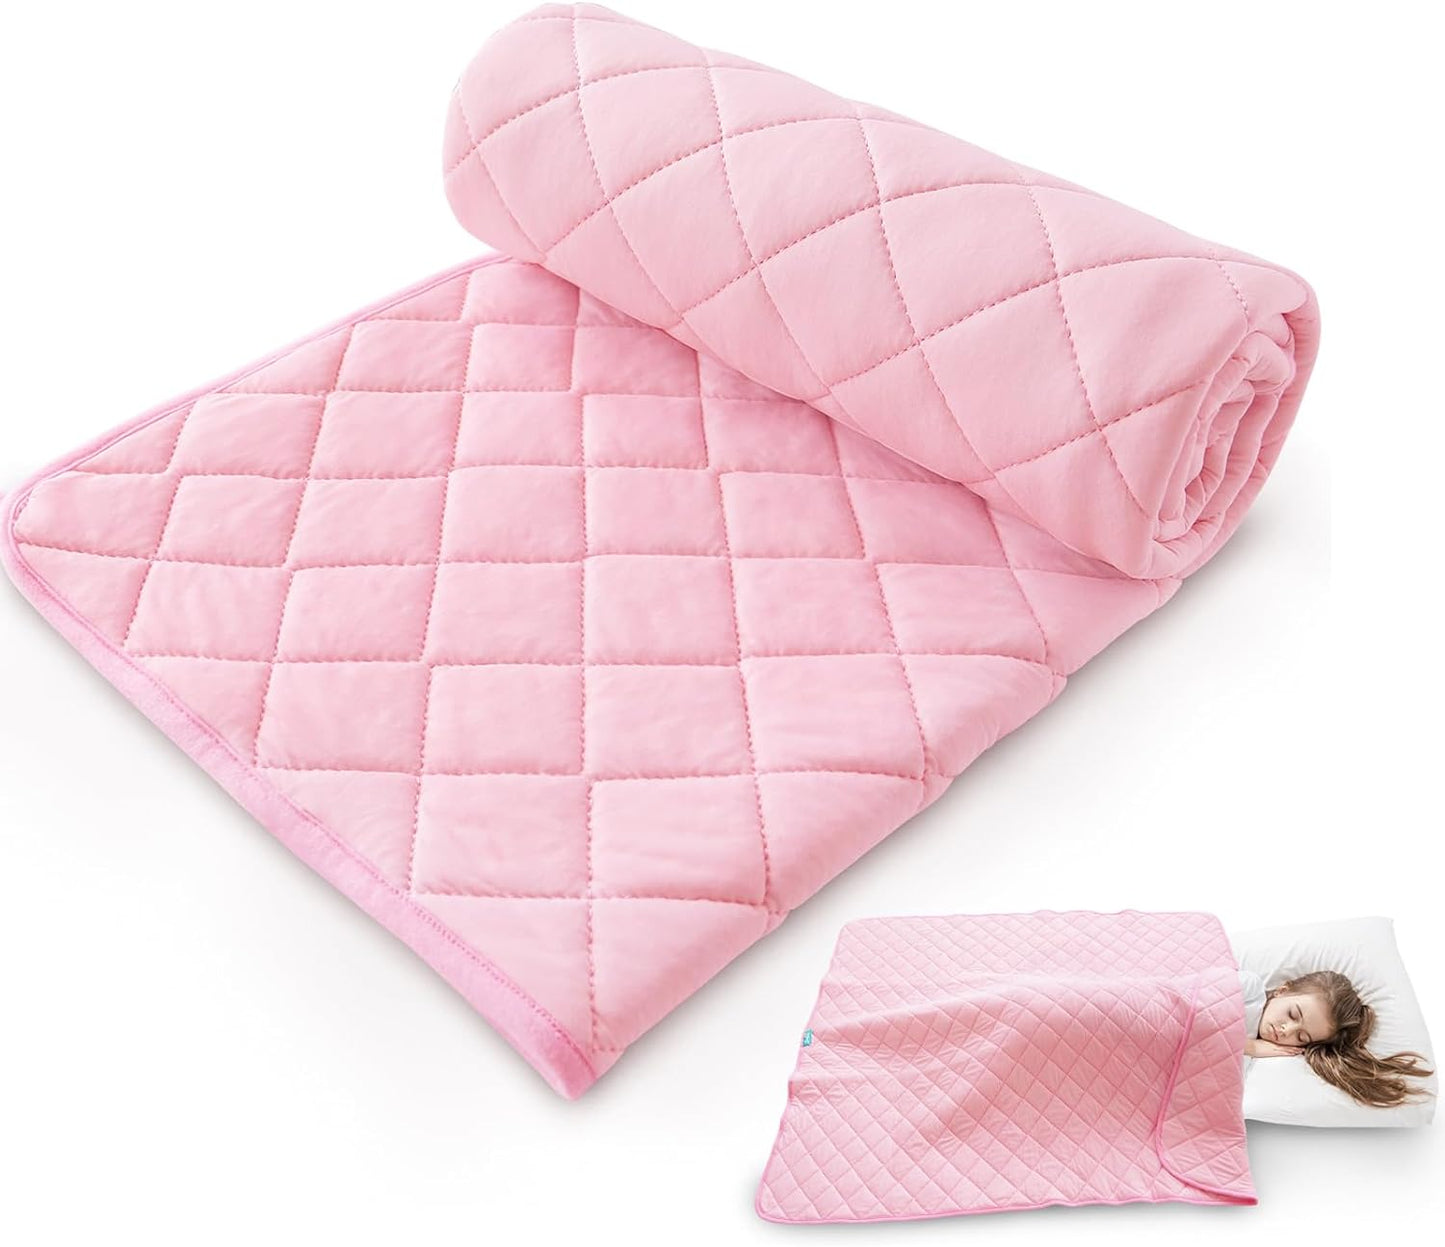 Toddler Blanket - Quilted Kids Cot Bed Comforter 39"x47", Lightweight and Soft